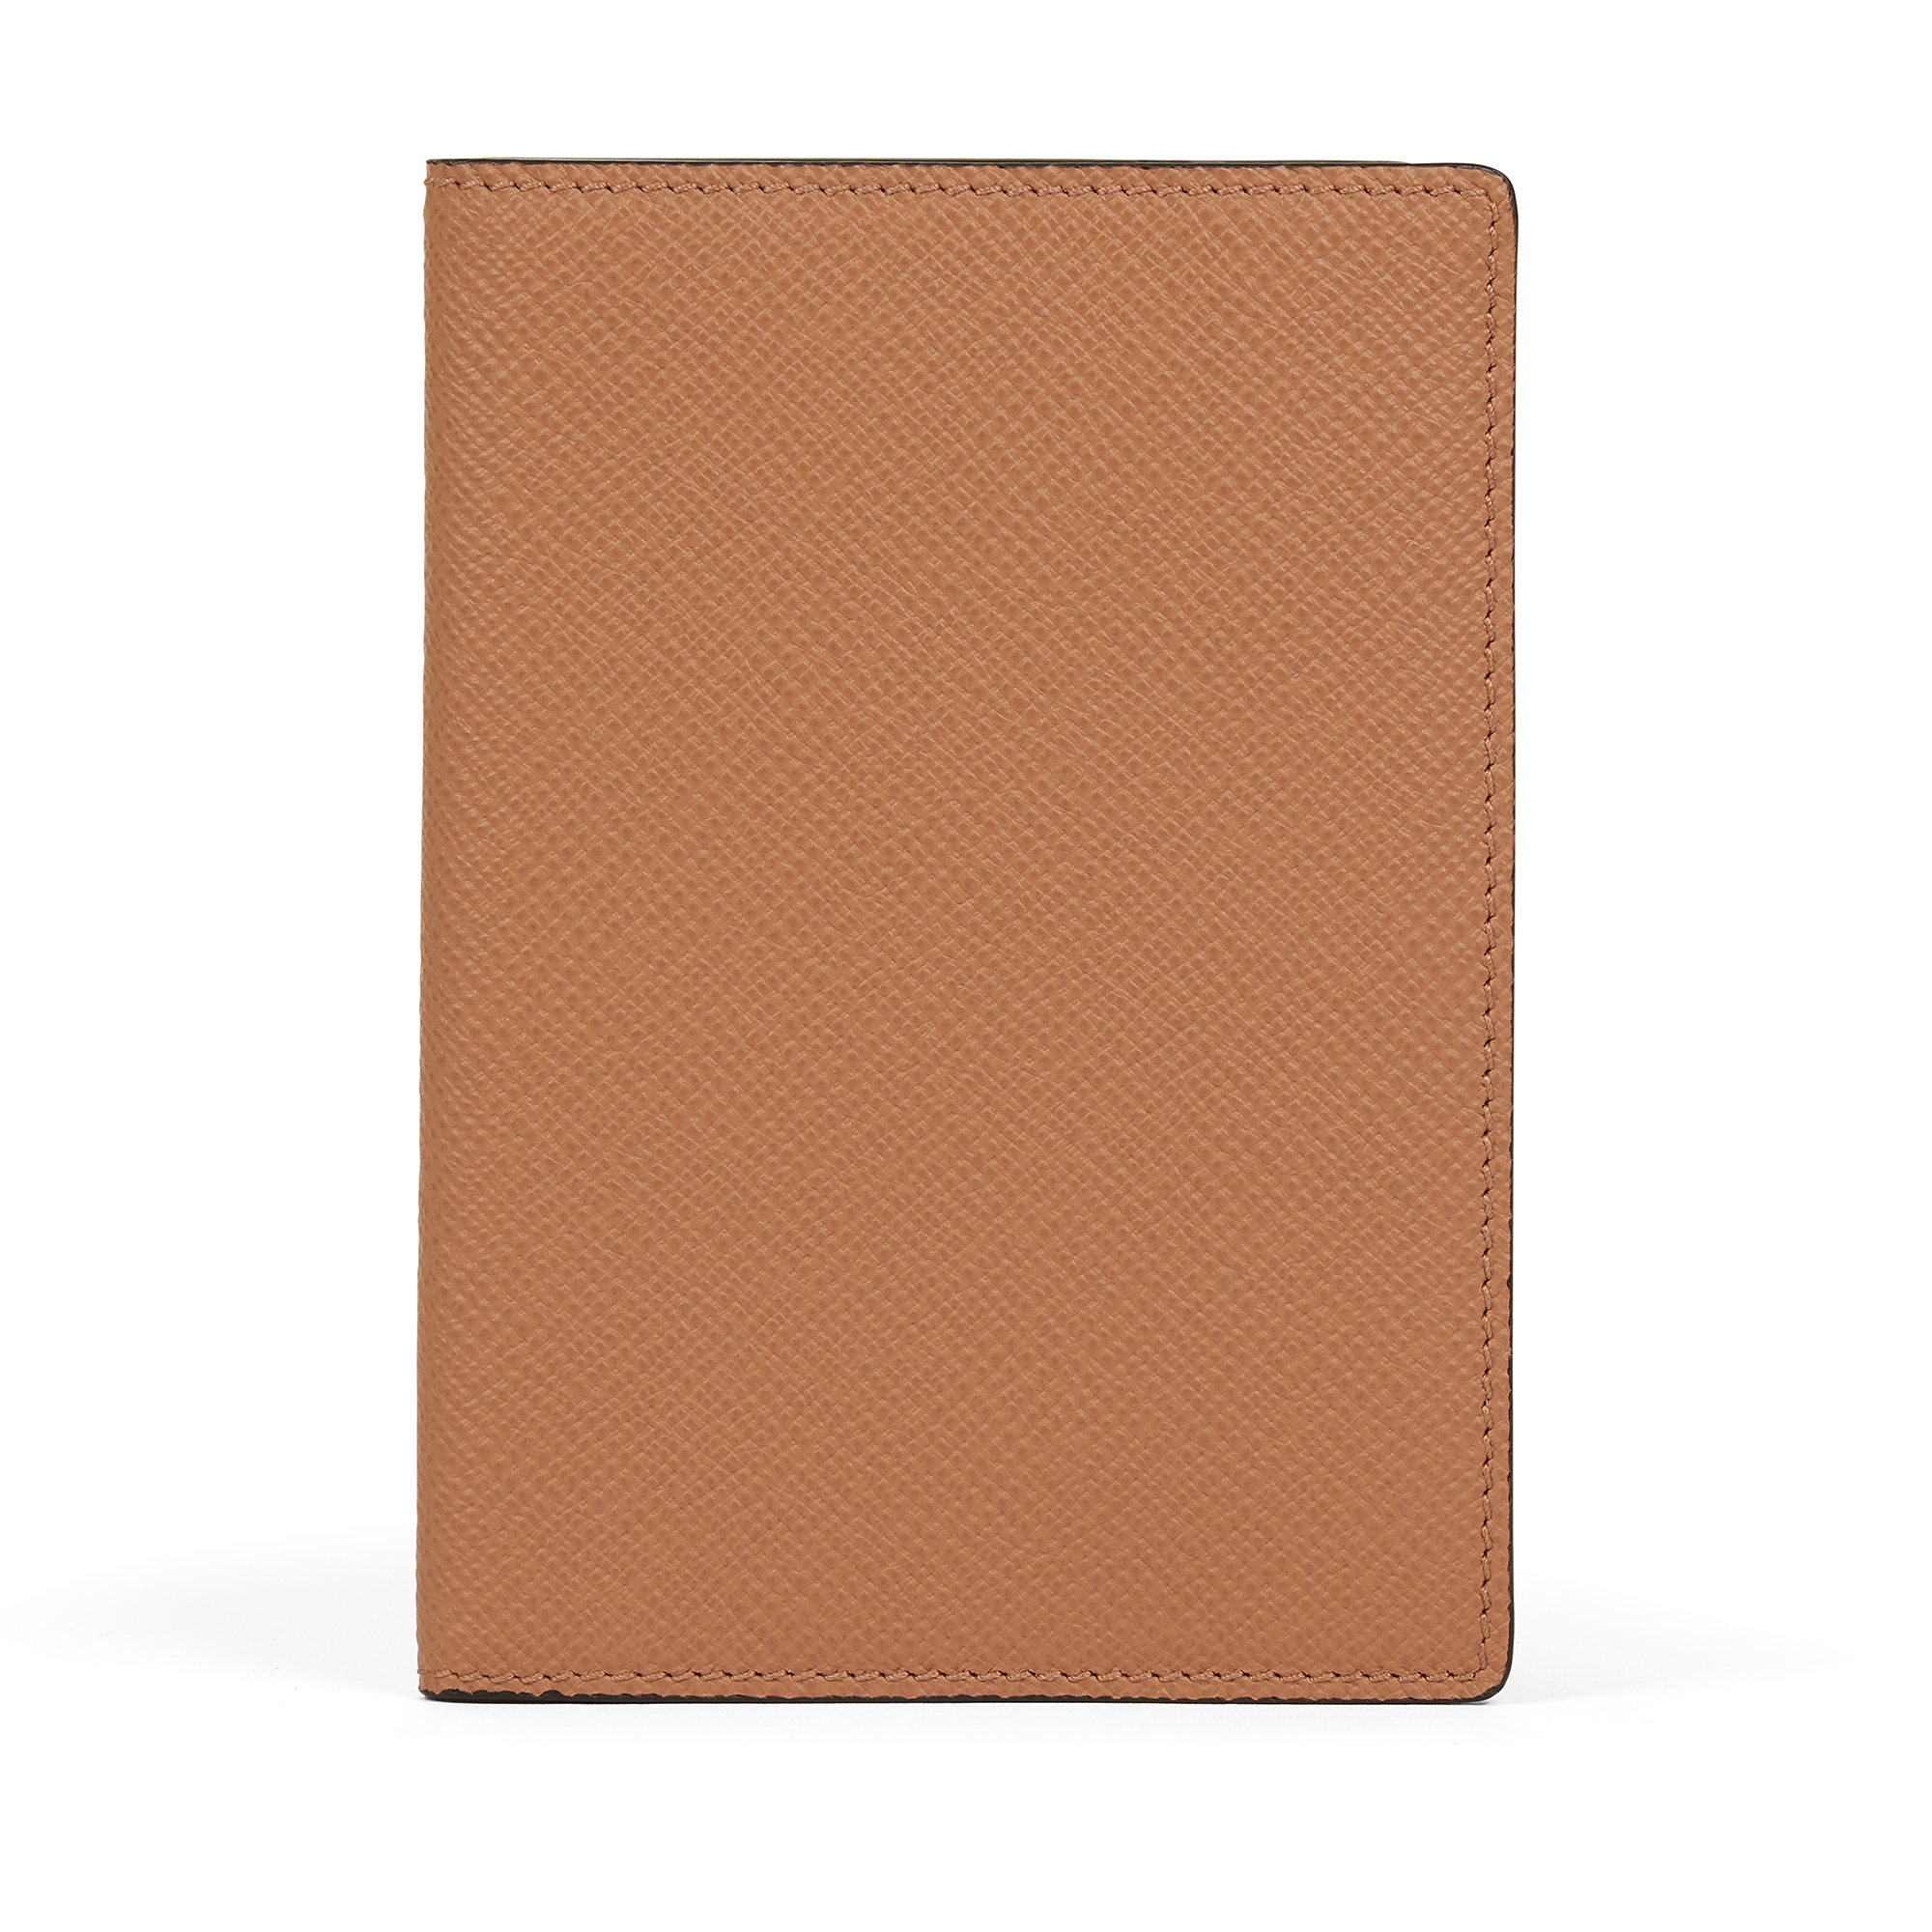 Passport Cover in Panama in light rosewood | Smythson